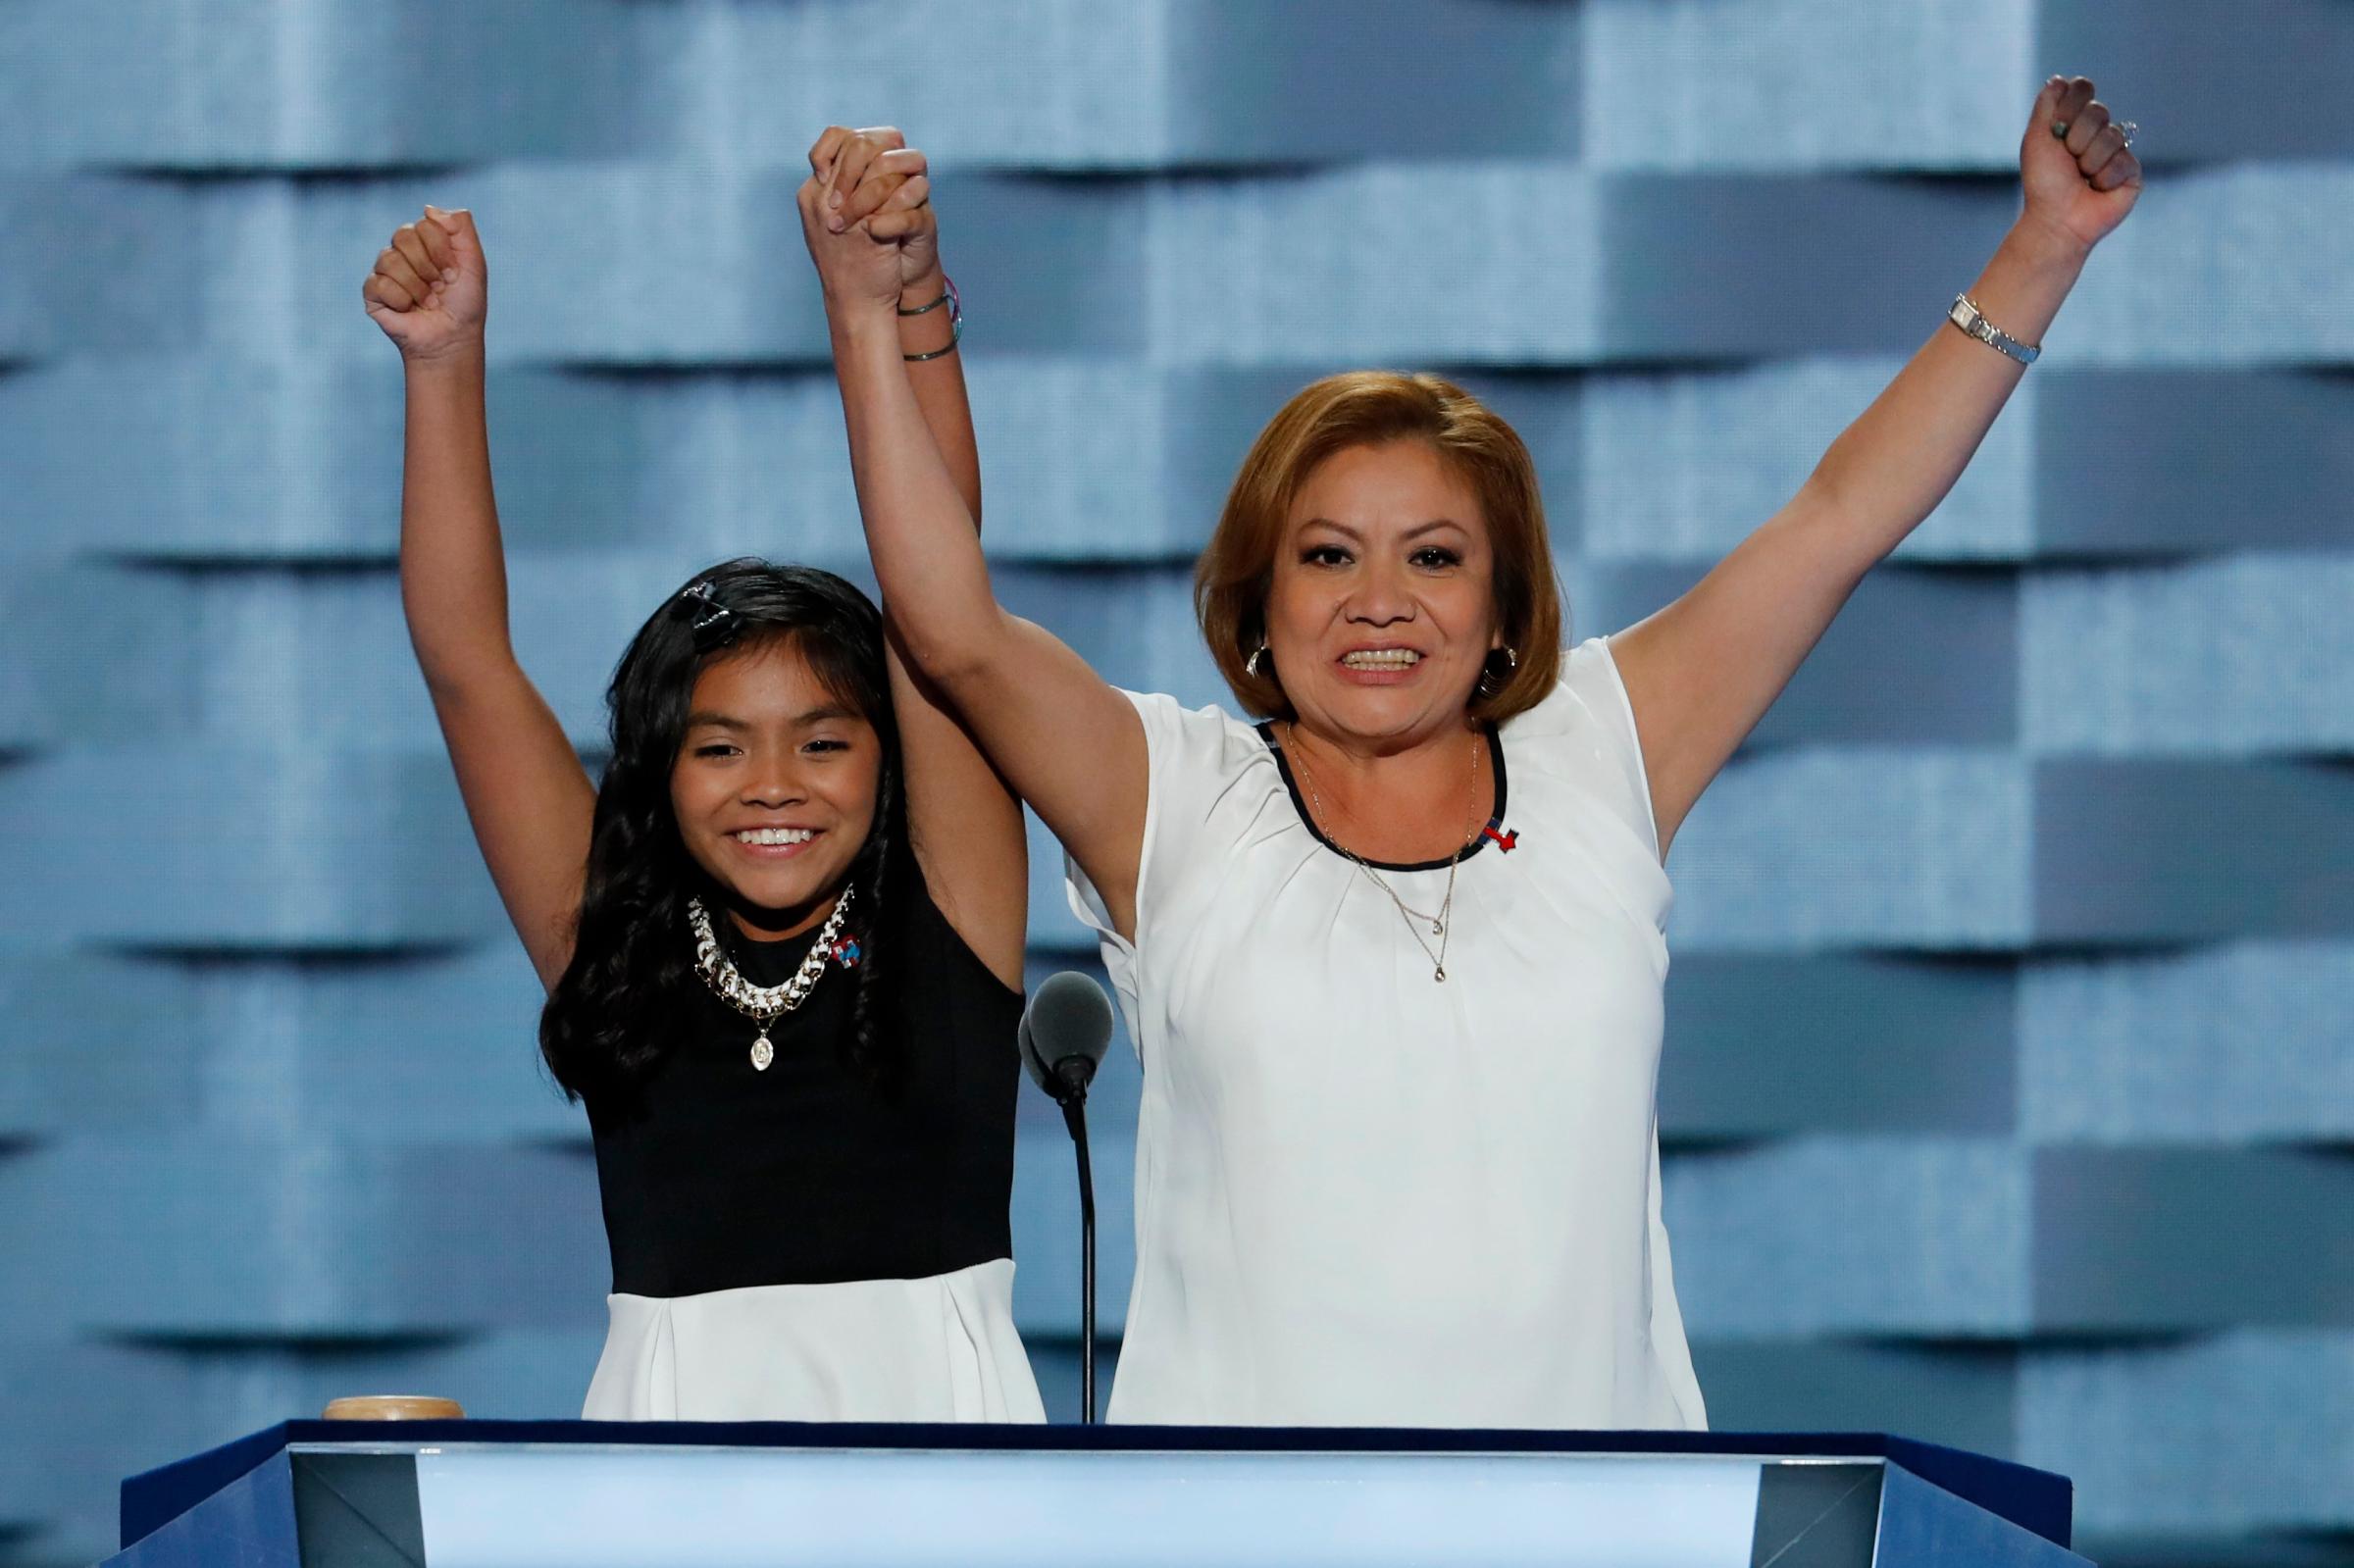 11-year-old Karla Ortiz, left, and her mother Francisca Ortiz speak during the first day of the Democratic National Convention in Philadelphia on Monday, July 25, 2016.